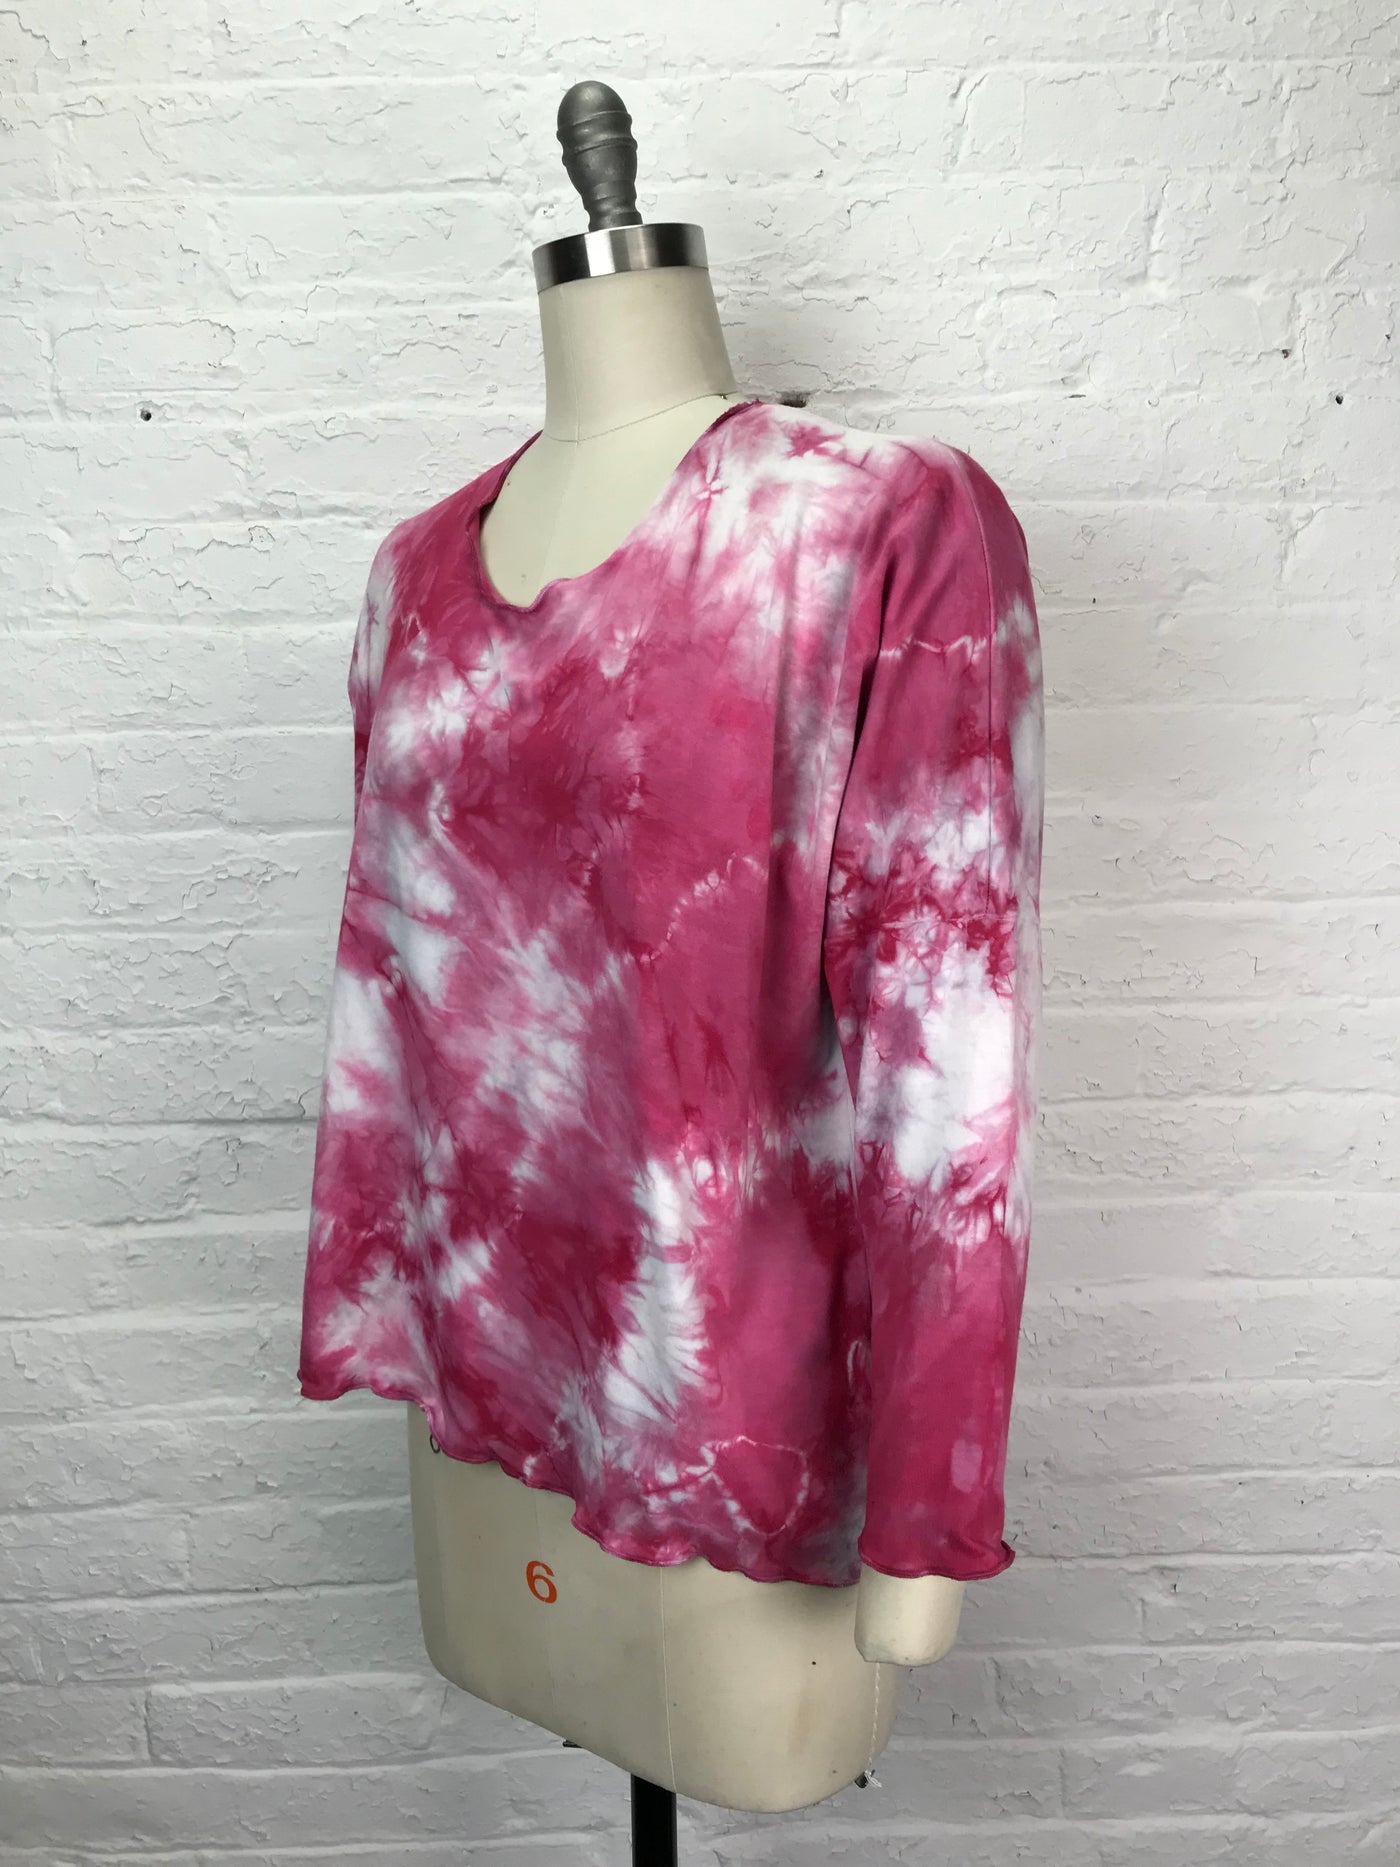 Nyla Long Sleeve Shirt in Cherry Blossom - One size